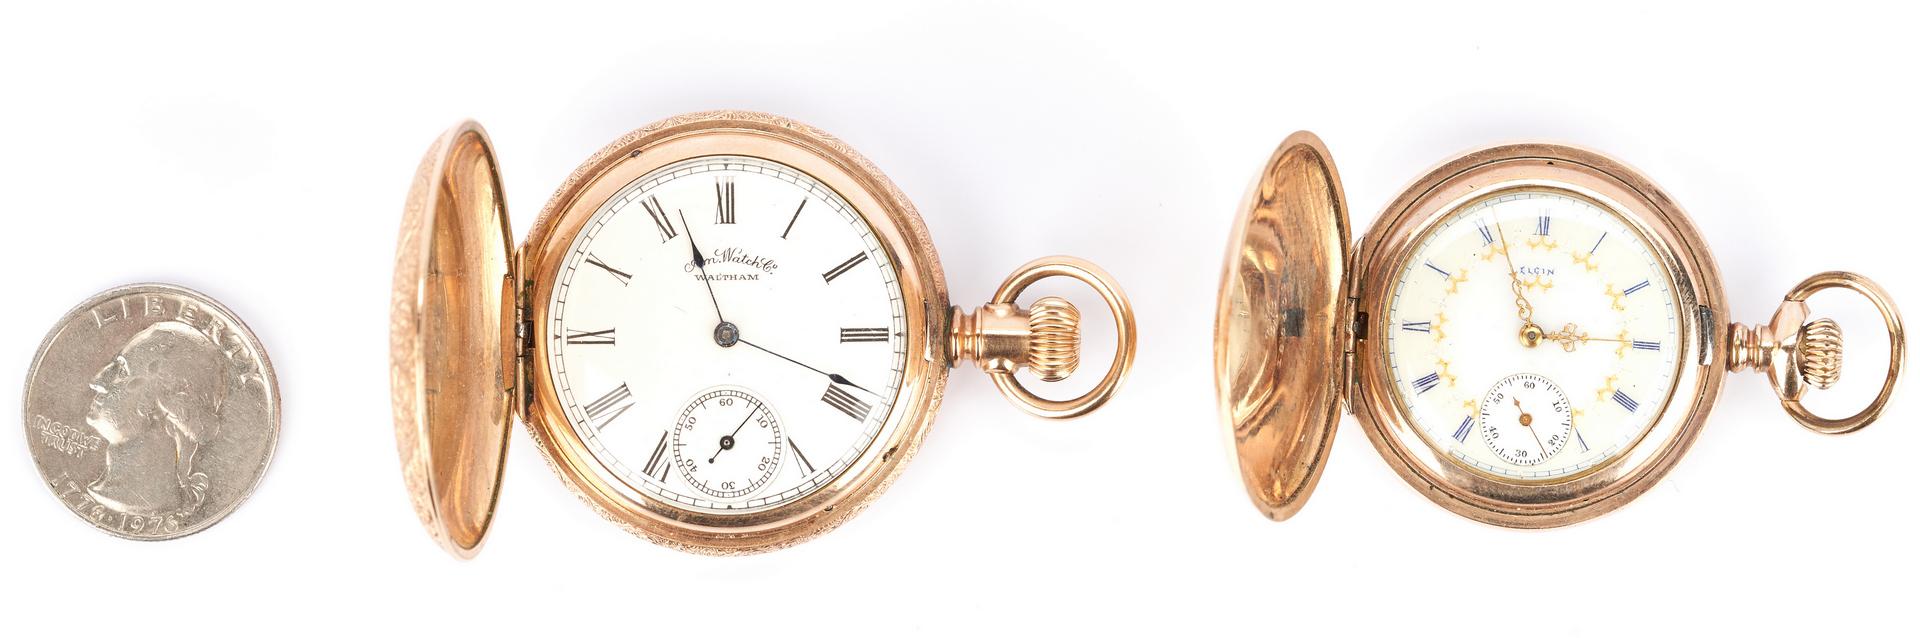 2 14K Hunting Case Pocket Watches - Image 12 of 12